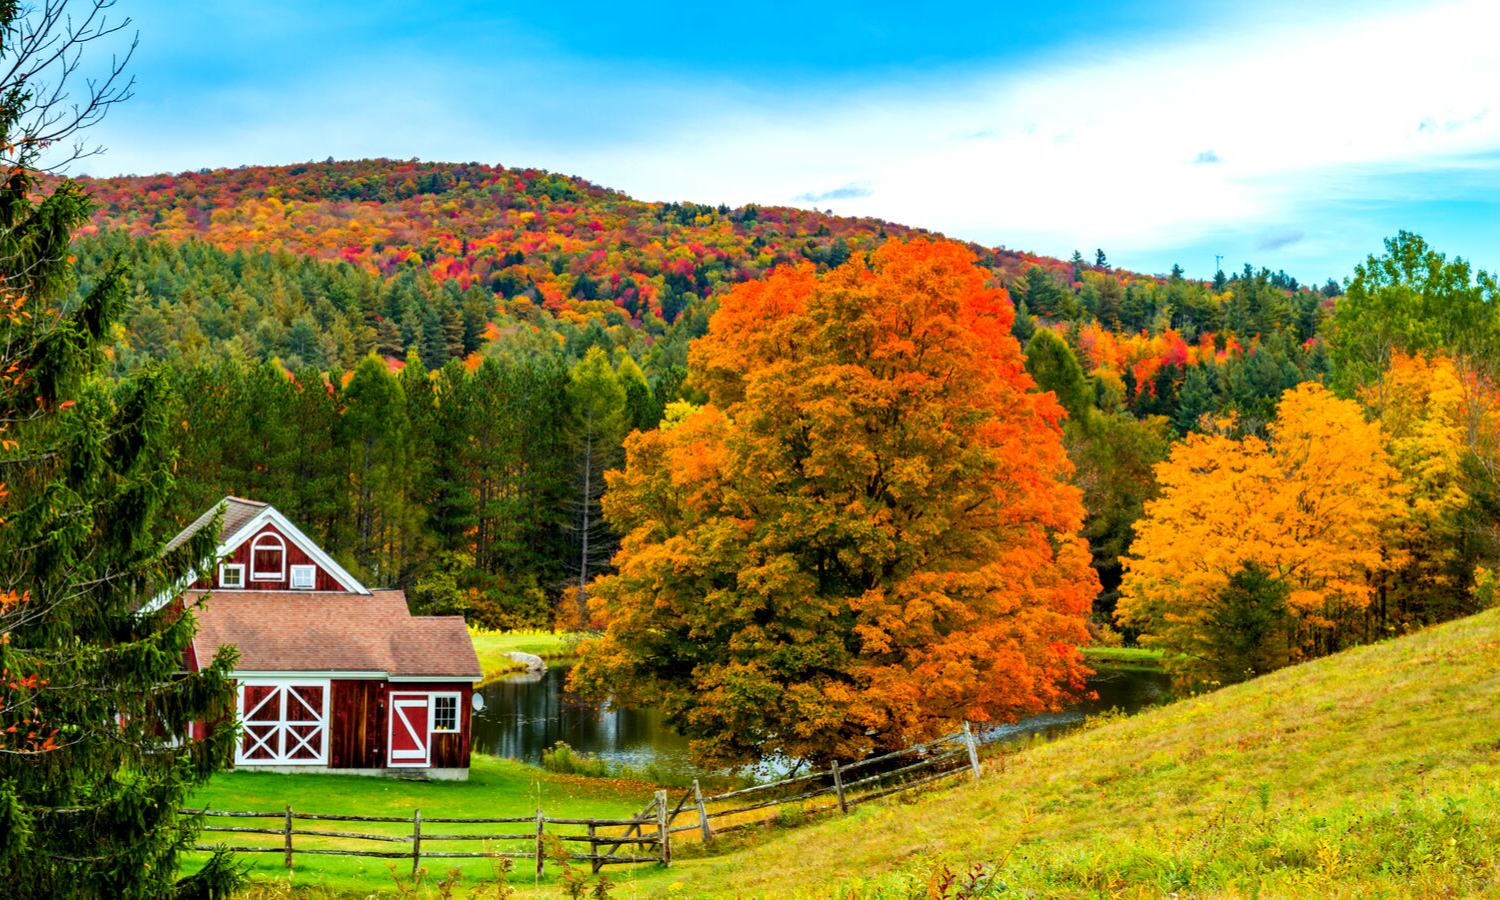 Photograph of an American autumn landscape. Red barn nestled in red, orange and green-leafed trees. 